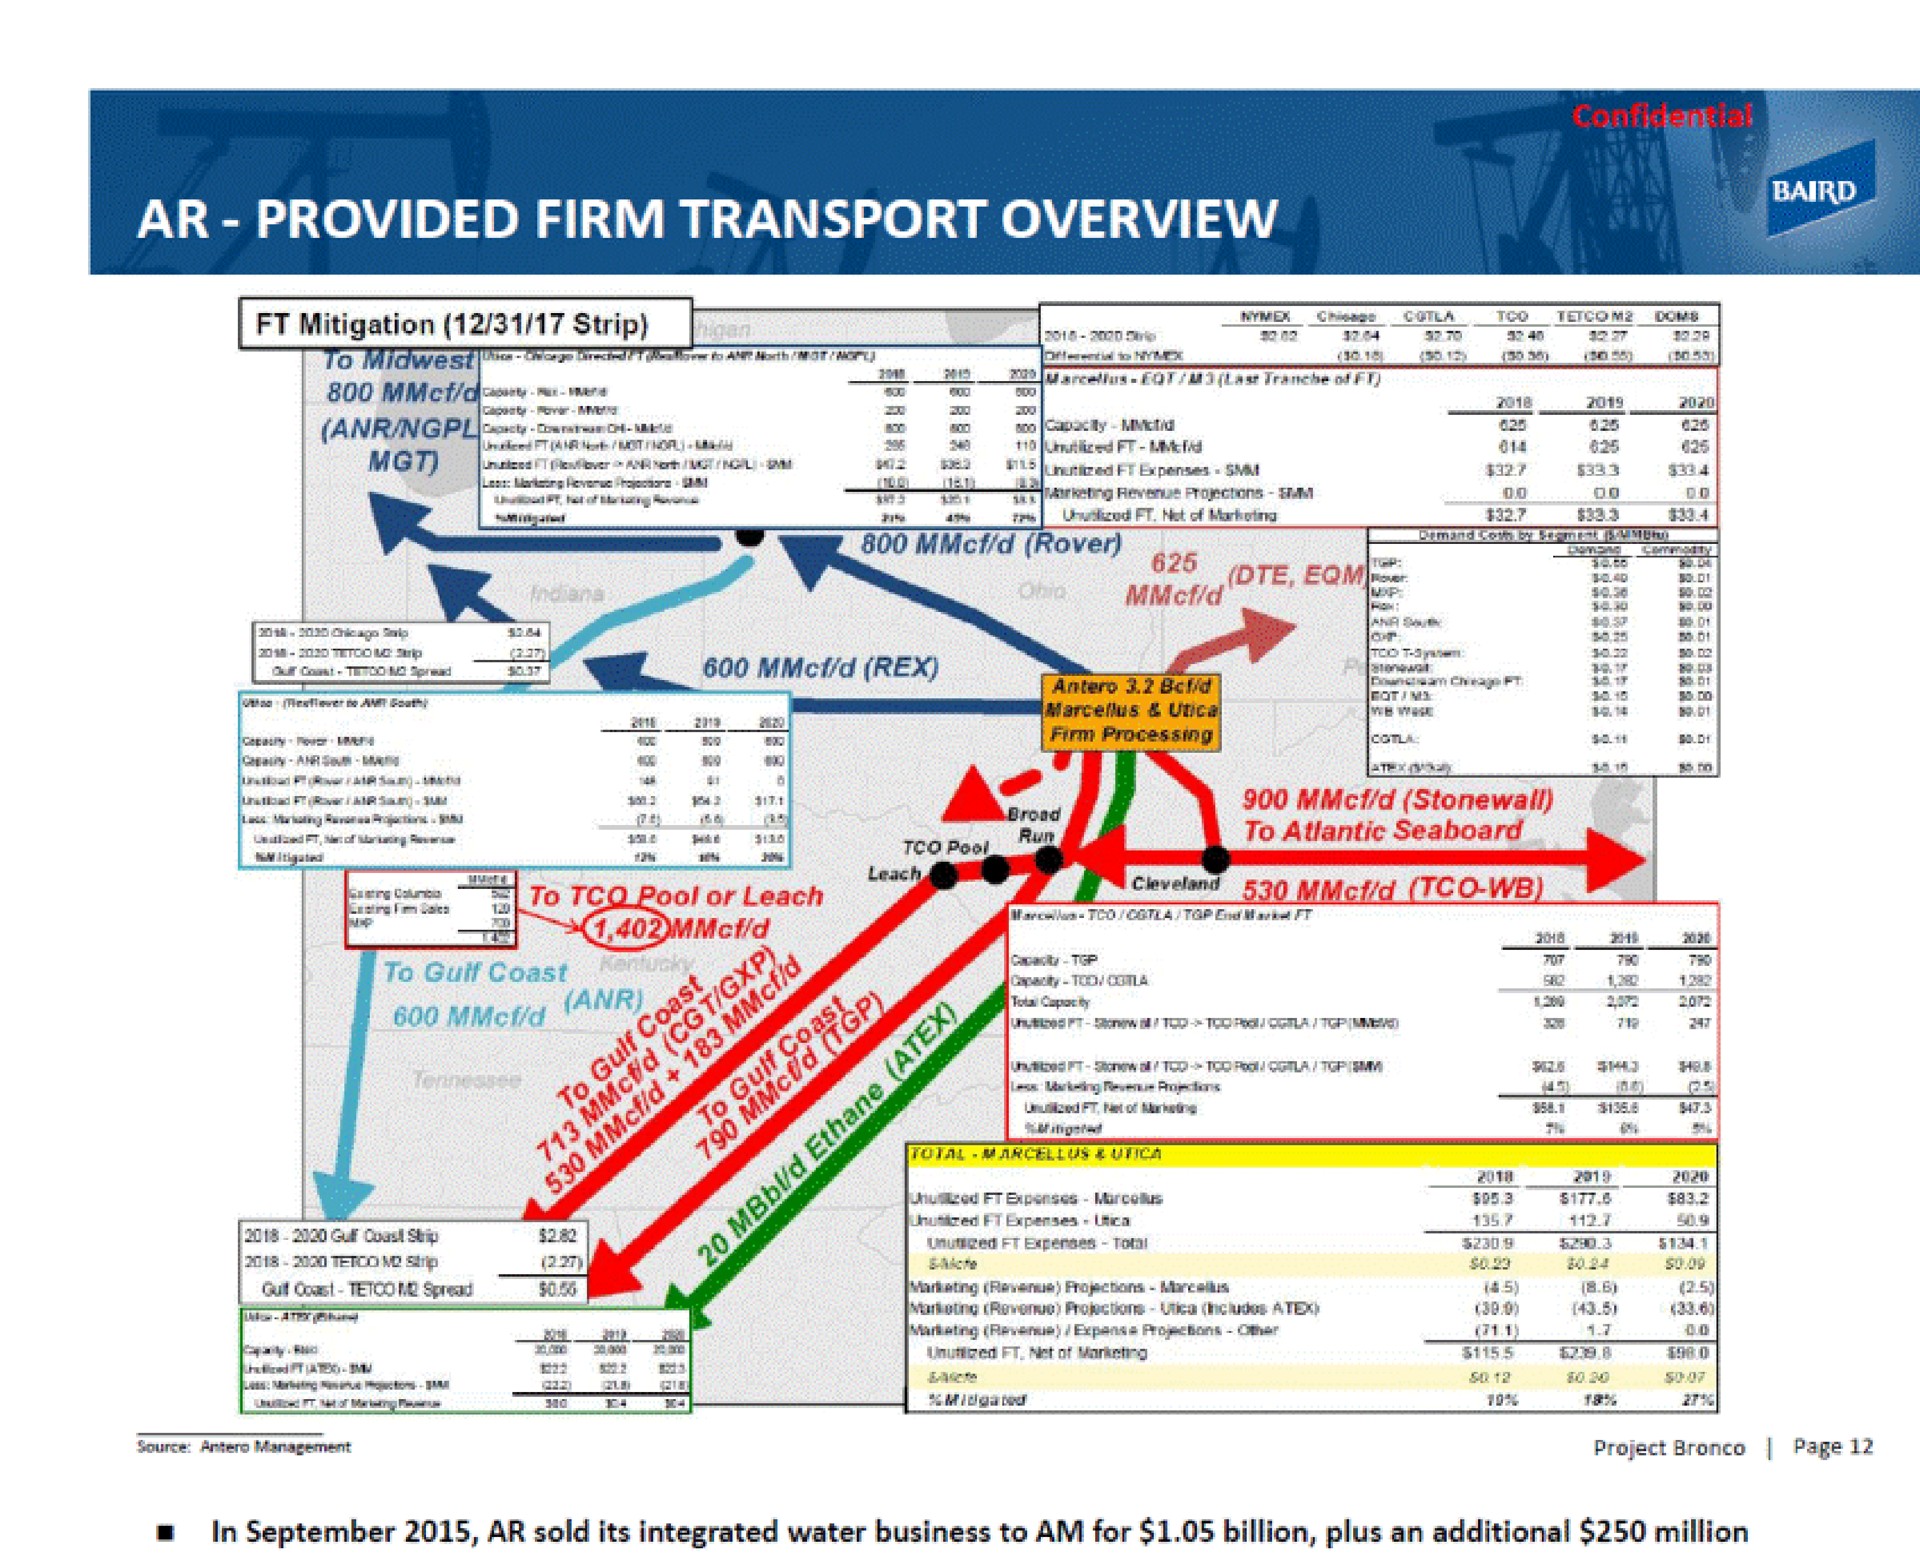 provided firm transport overview mitigation strip is sores | Baird